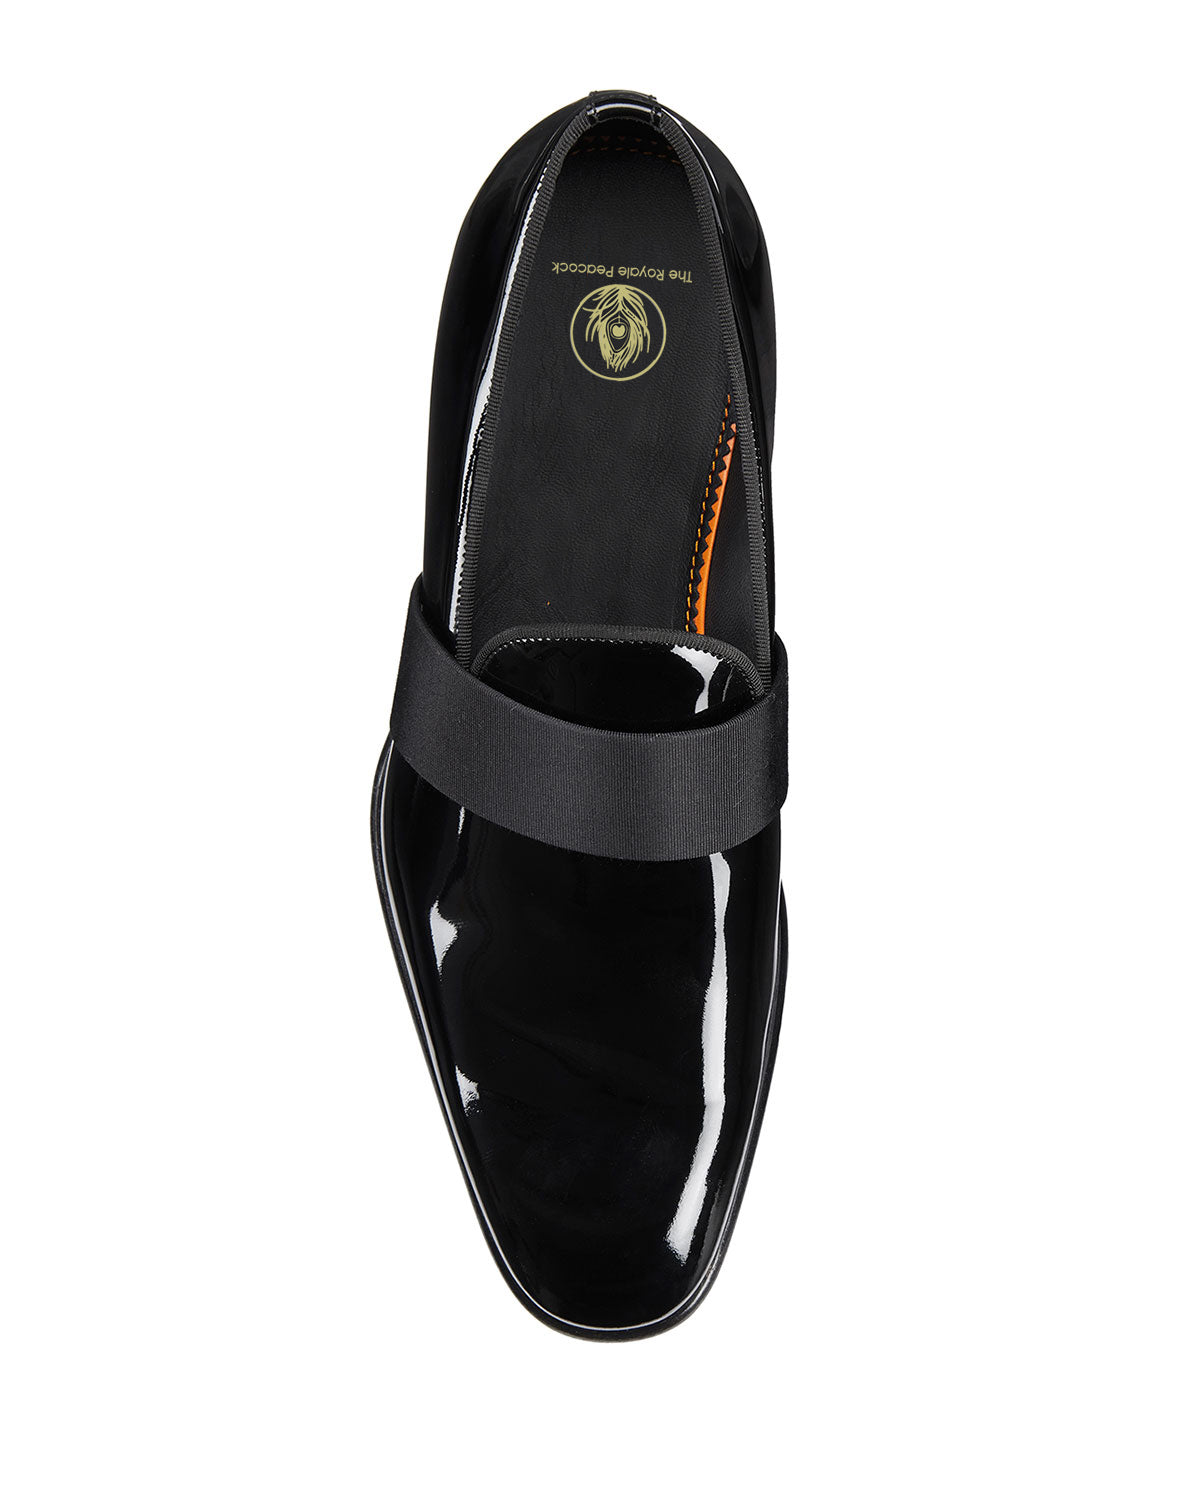 Black Patent Leather Formal Penny Loafer Slip On Shoes for Men with Leather Sole. Goodyear Welted Construction Available.